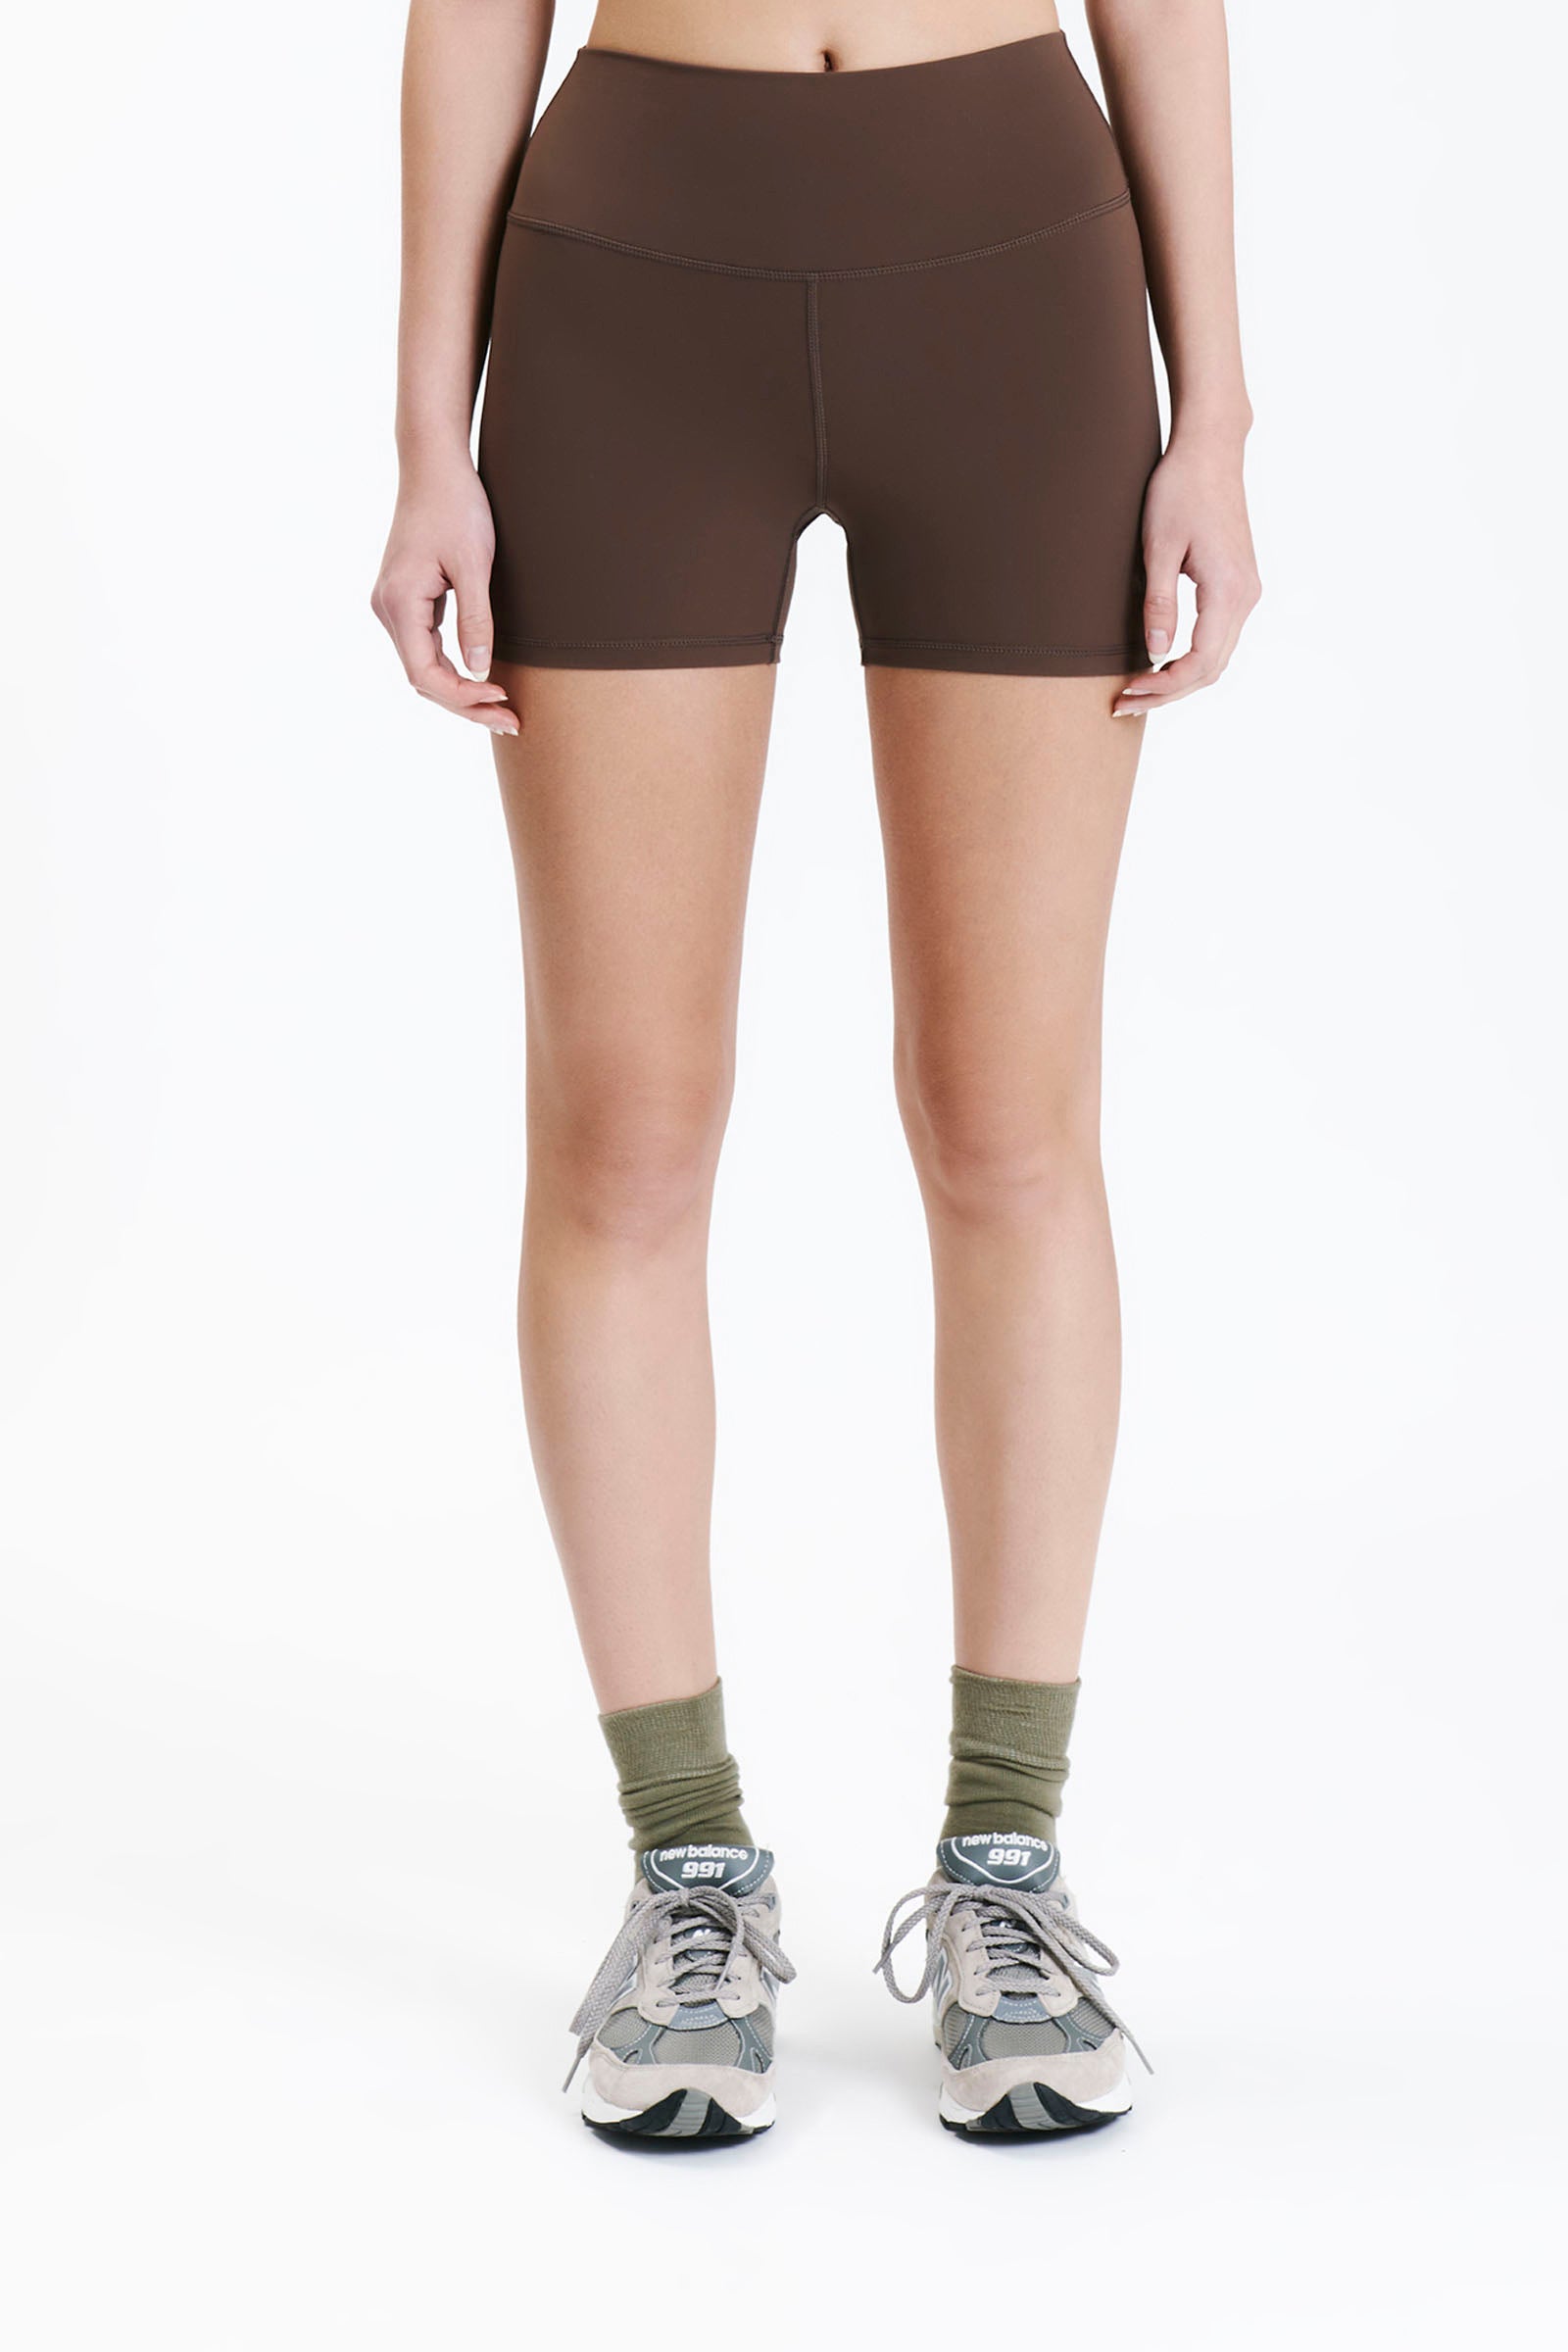 Nude Lucy Nude Active Mini Bike Short in a Brown Chocolate Cacao Colour